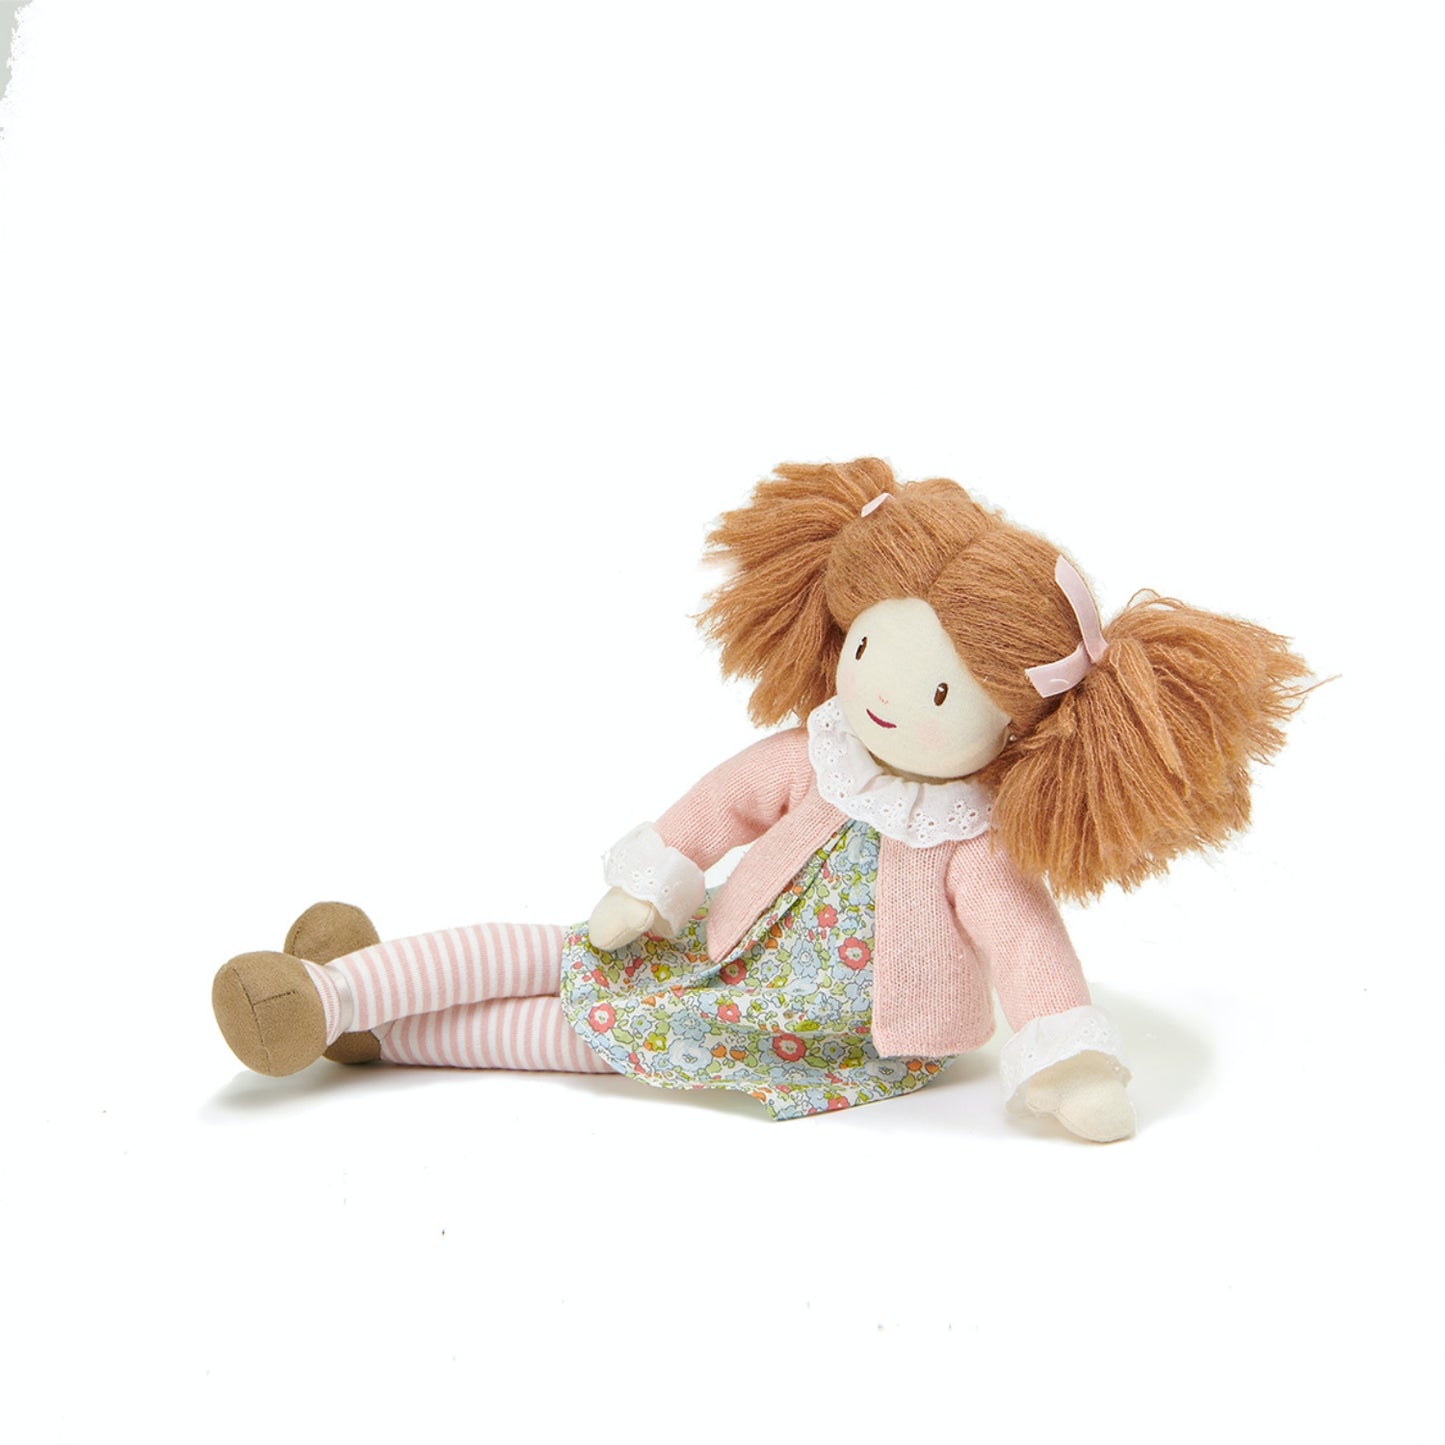 ThreadBear Design Marty Floral Rag Doll | Hand-Crafted Rag Doll | Soft Cotton Children’s Doll | Front View – Rag Doll Marty Standing | BeoVERDE.ie